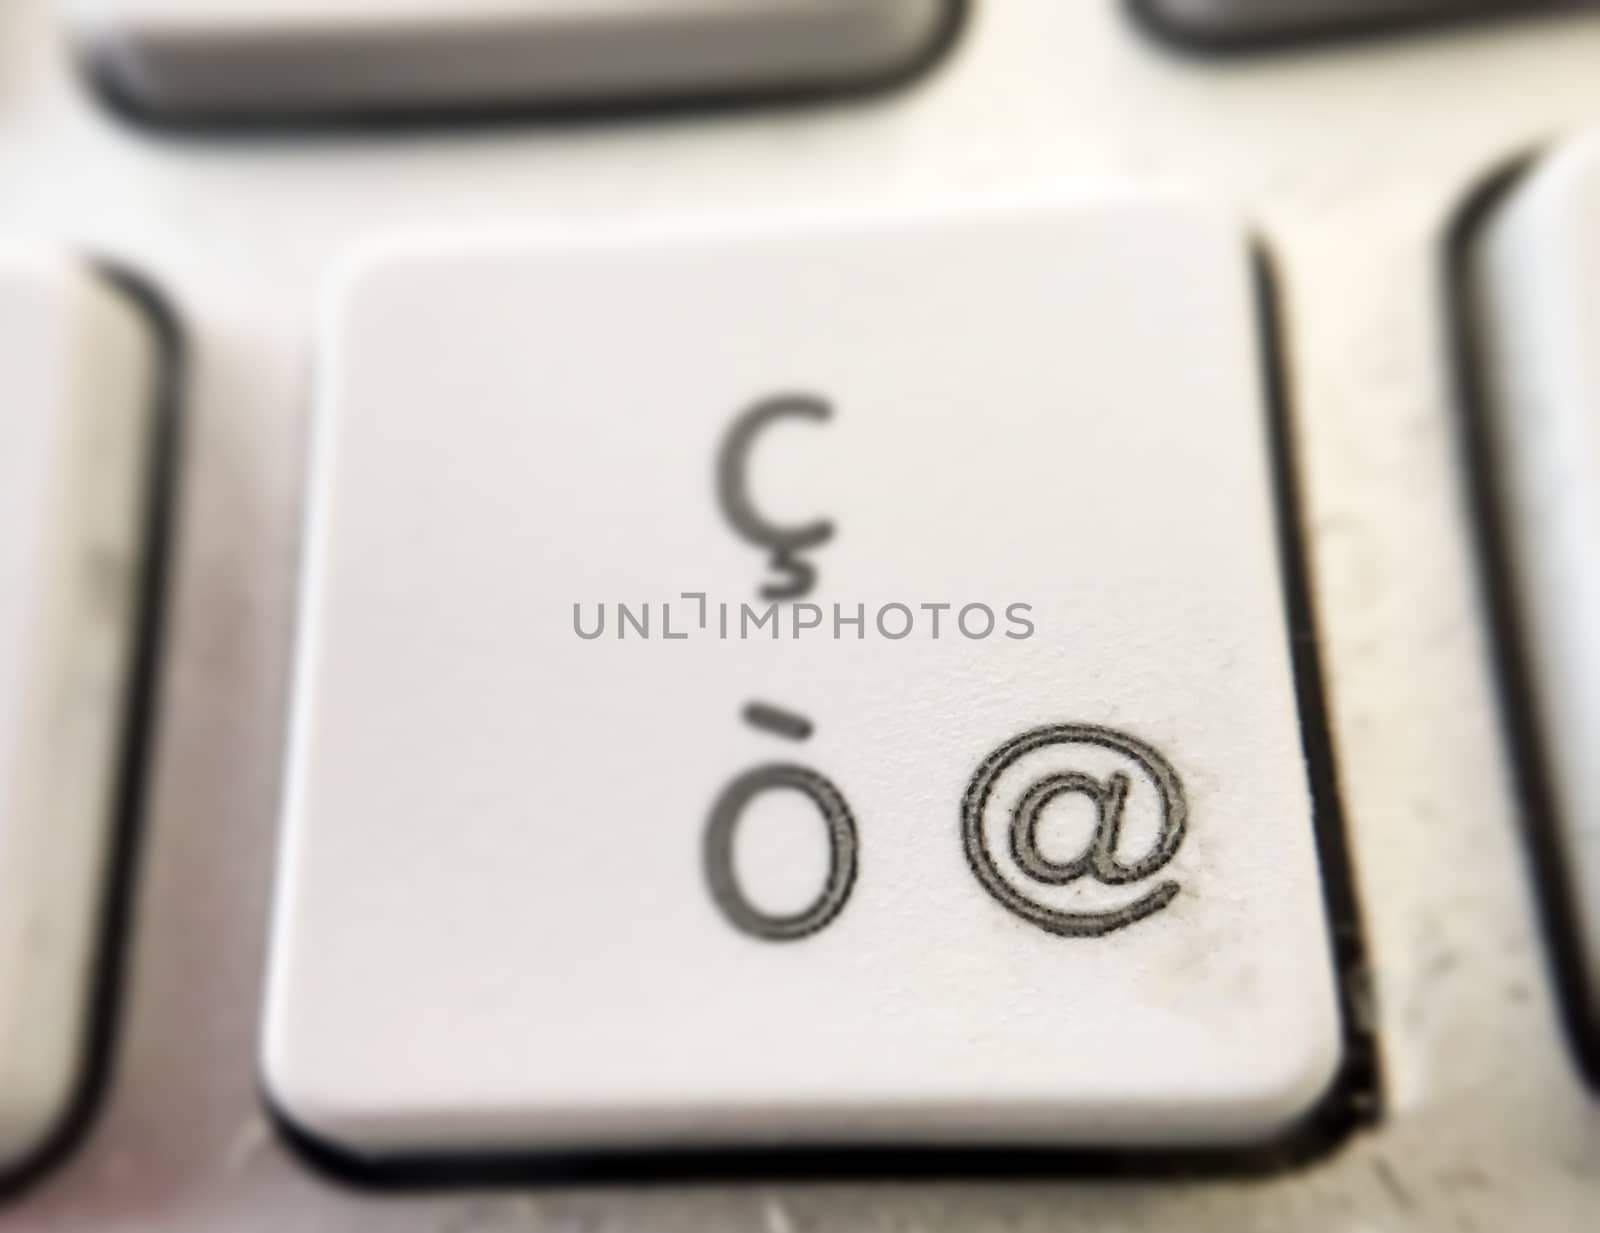 "ò" letter and @ Symbol on a Pc keyboard button by rarrarorro